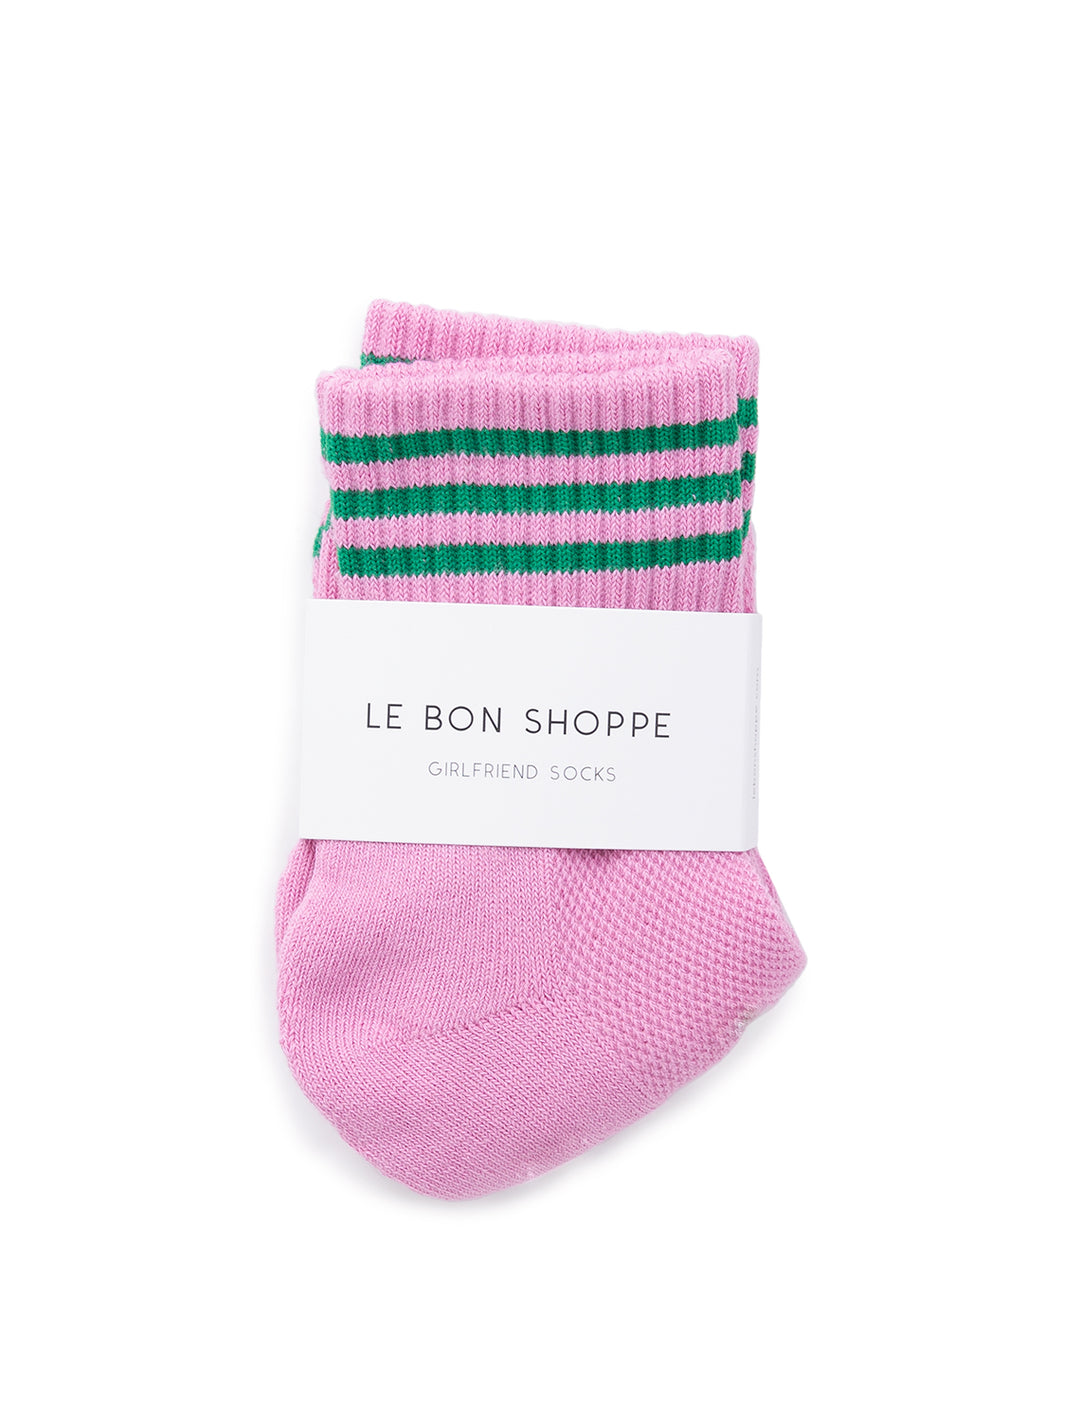 Front view of Le Bon Shoppe's girlfriend socks in rose pink.